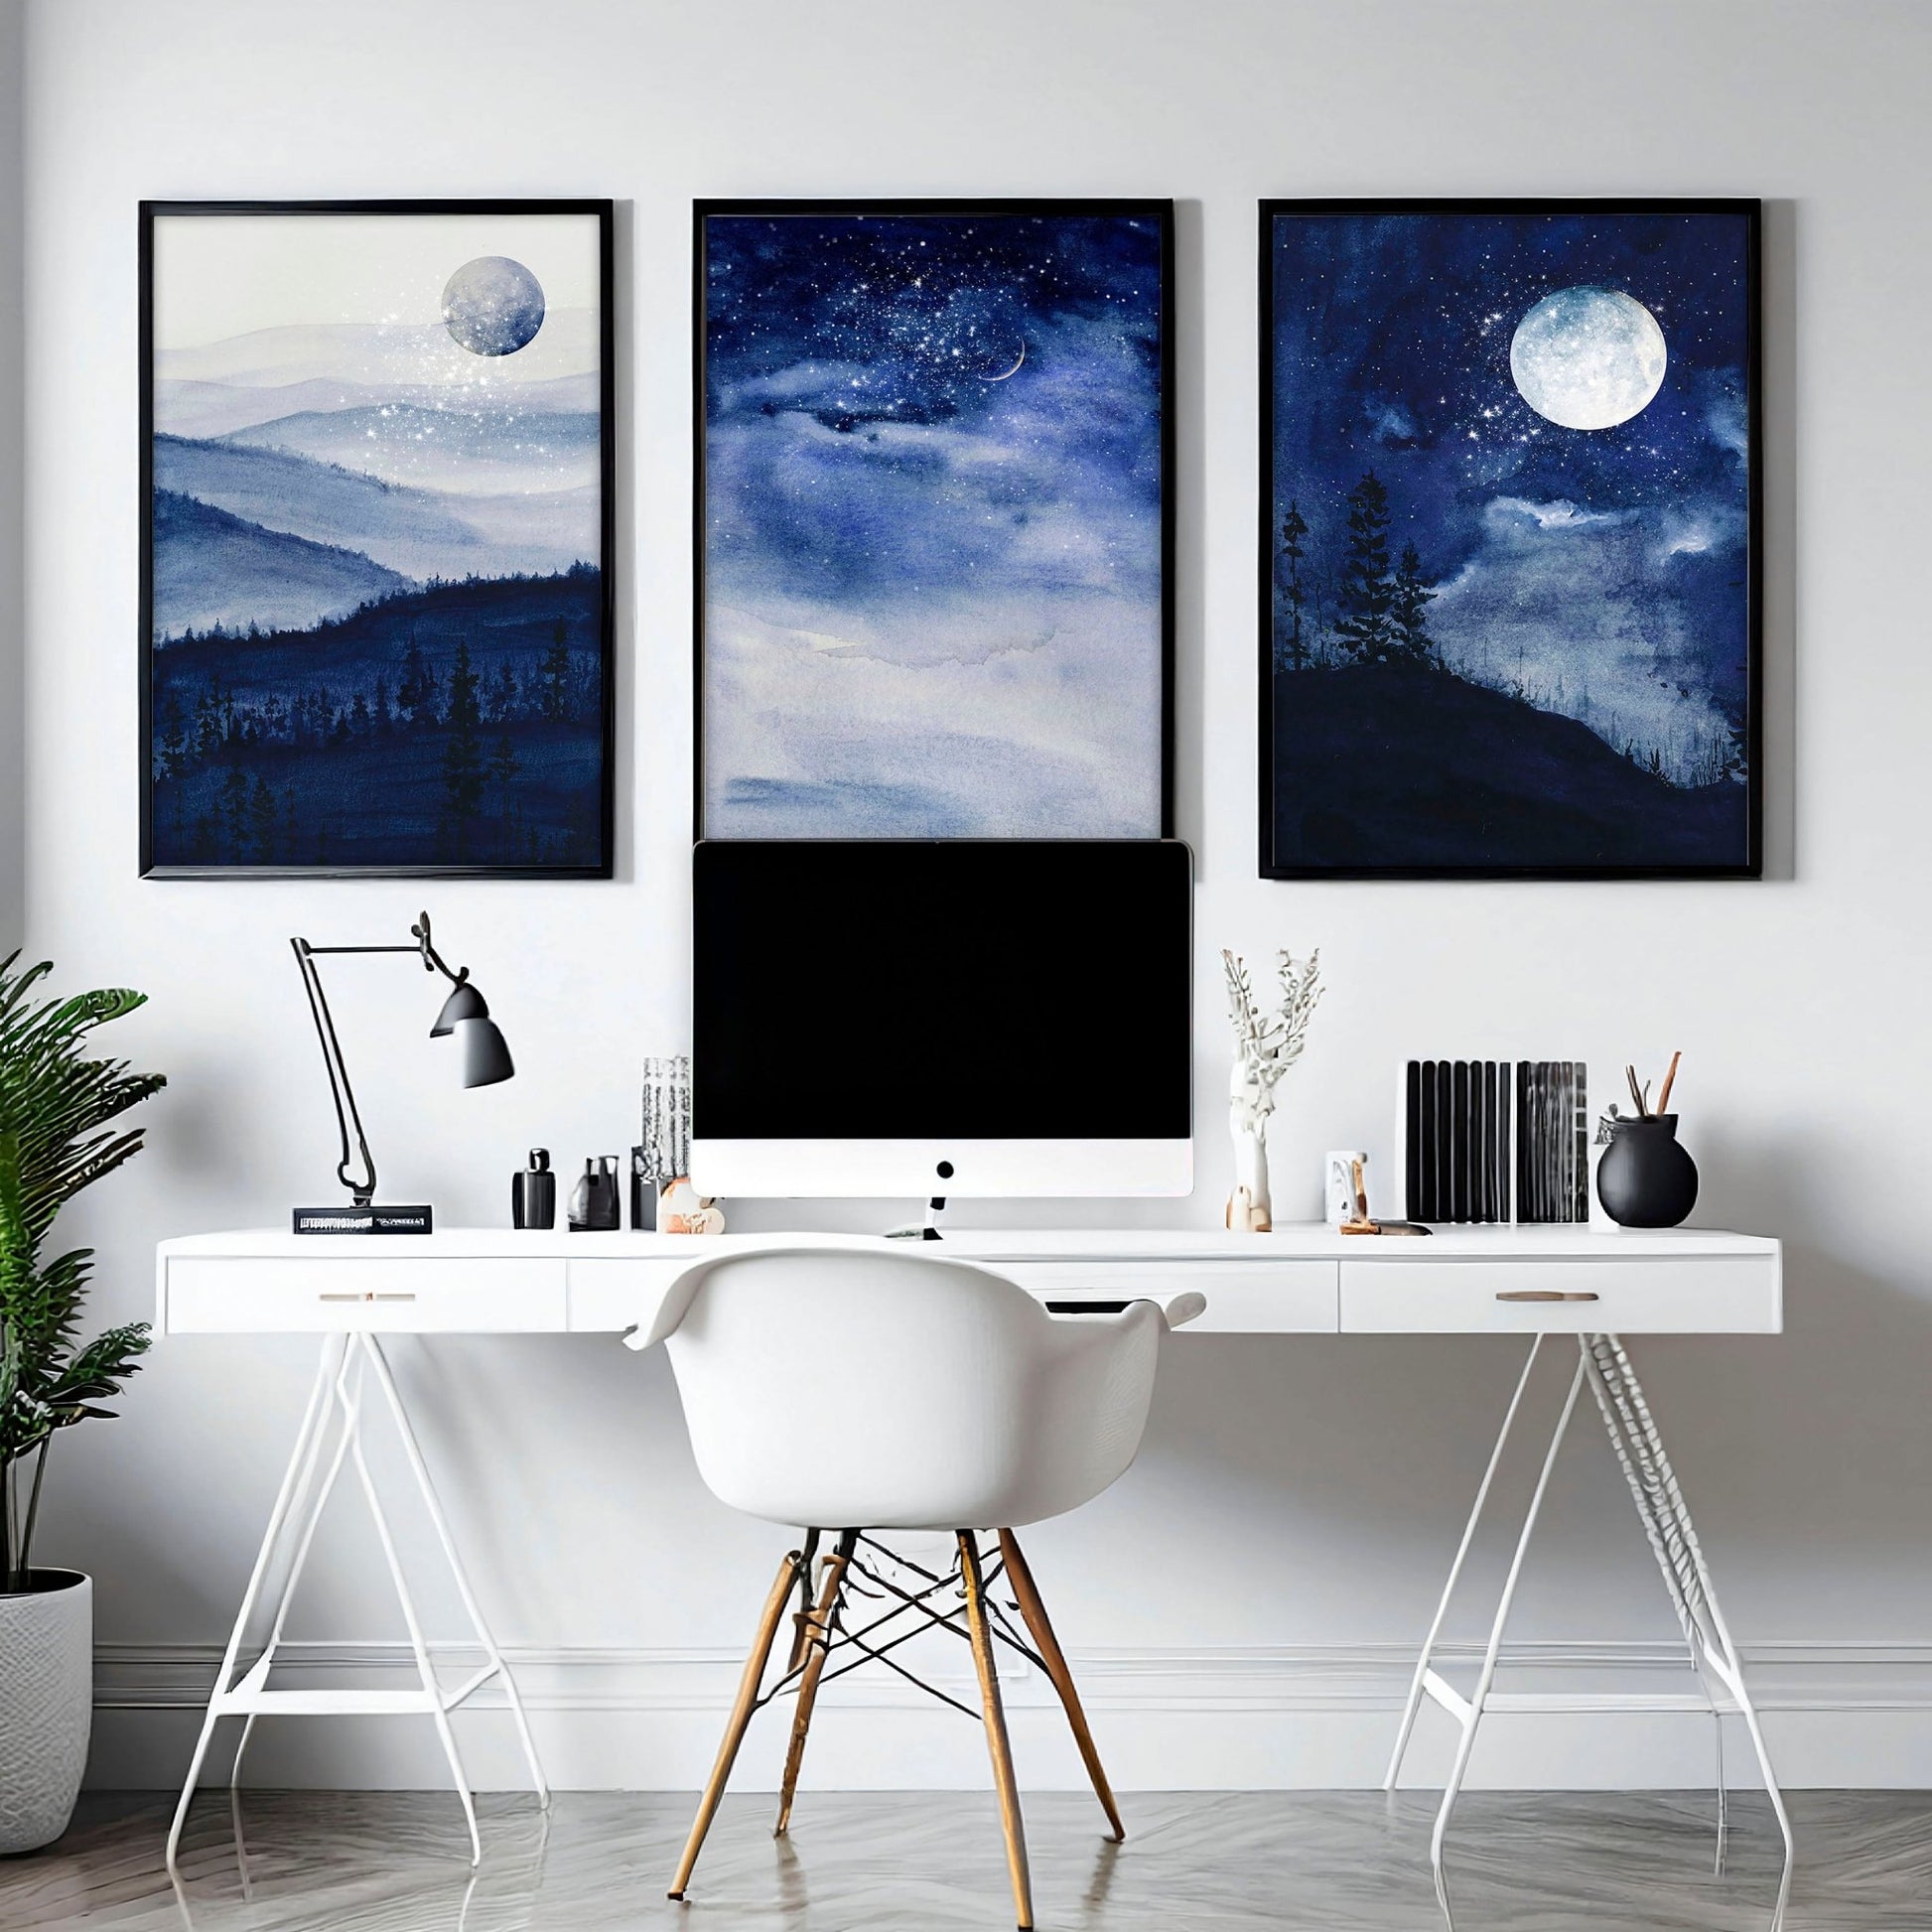 Home office decor ideas for him | set of 3 wall art prints - About Wall Art